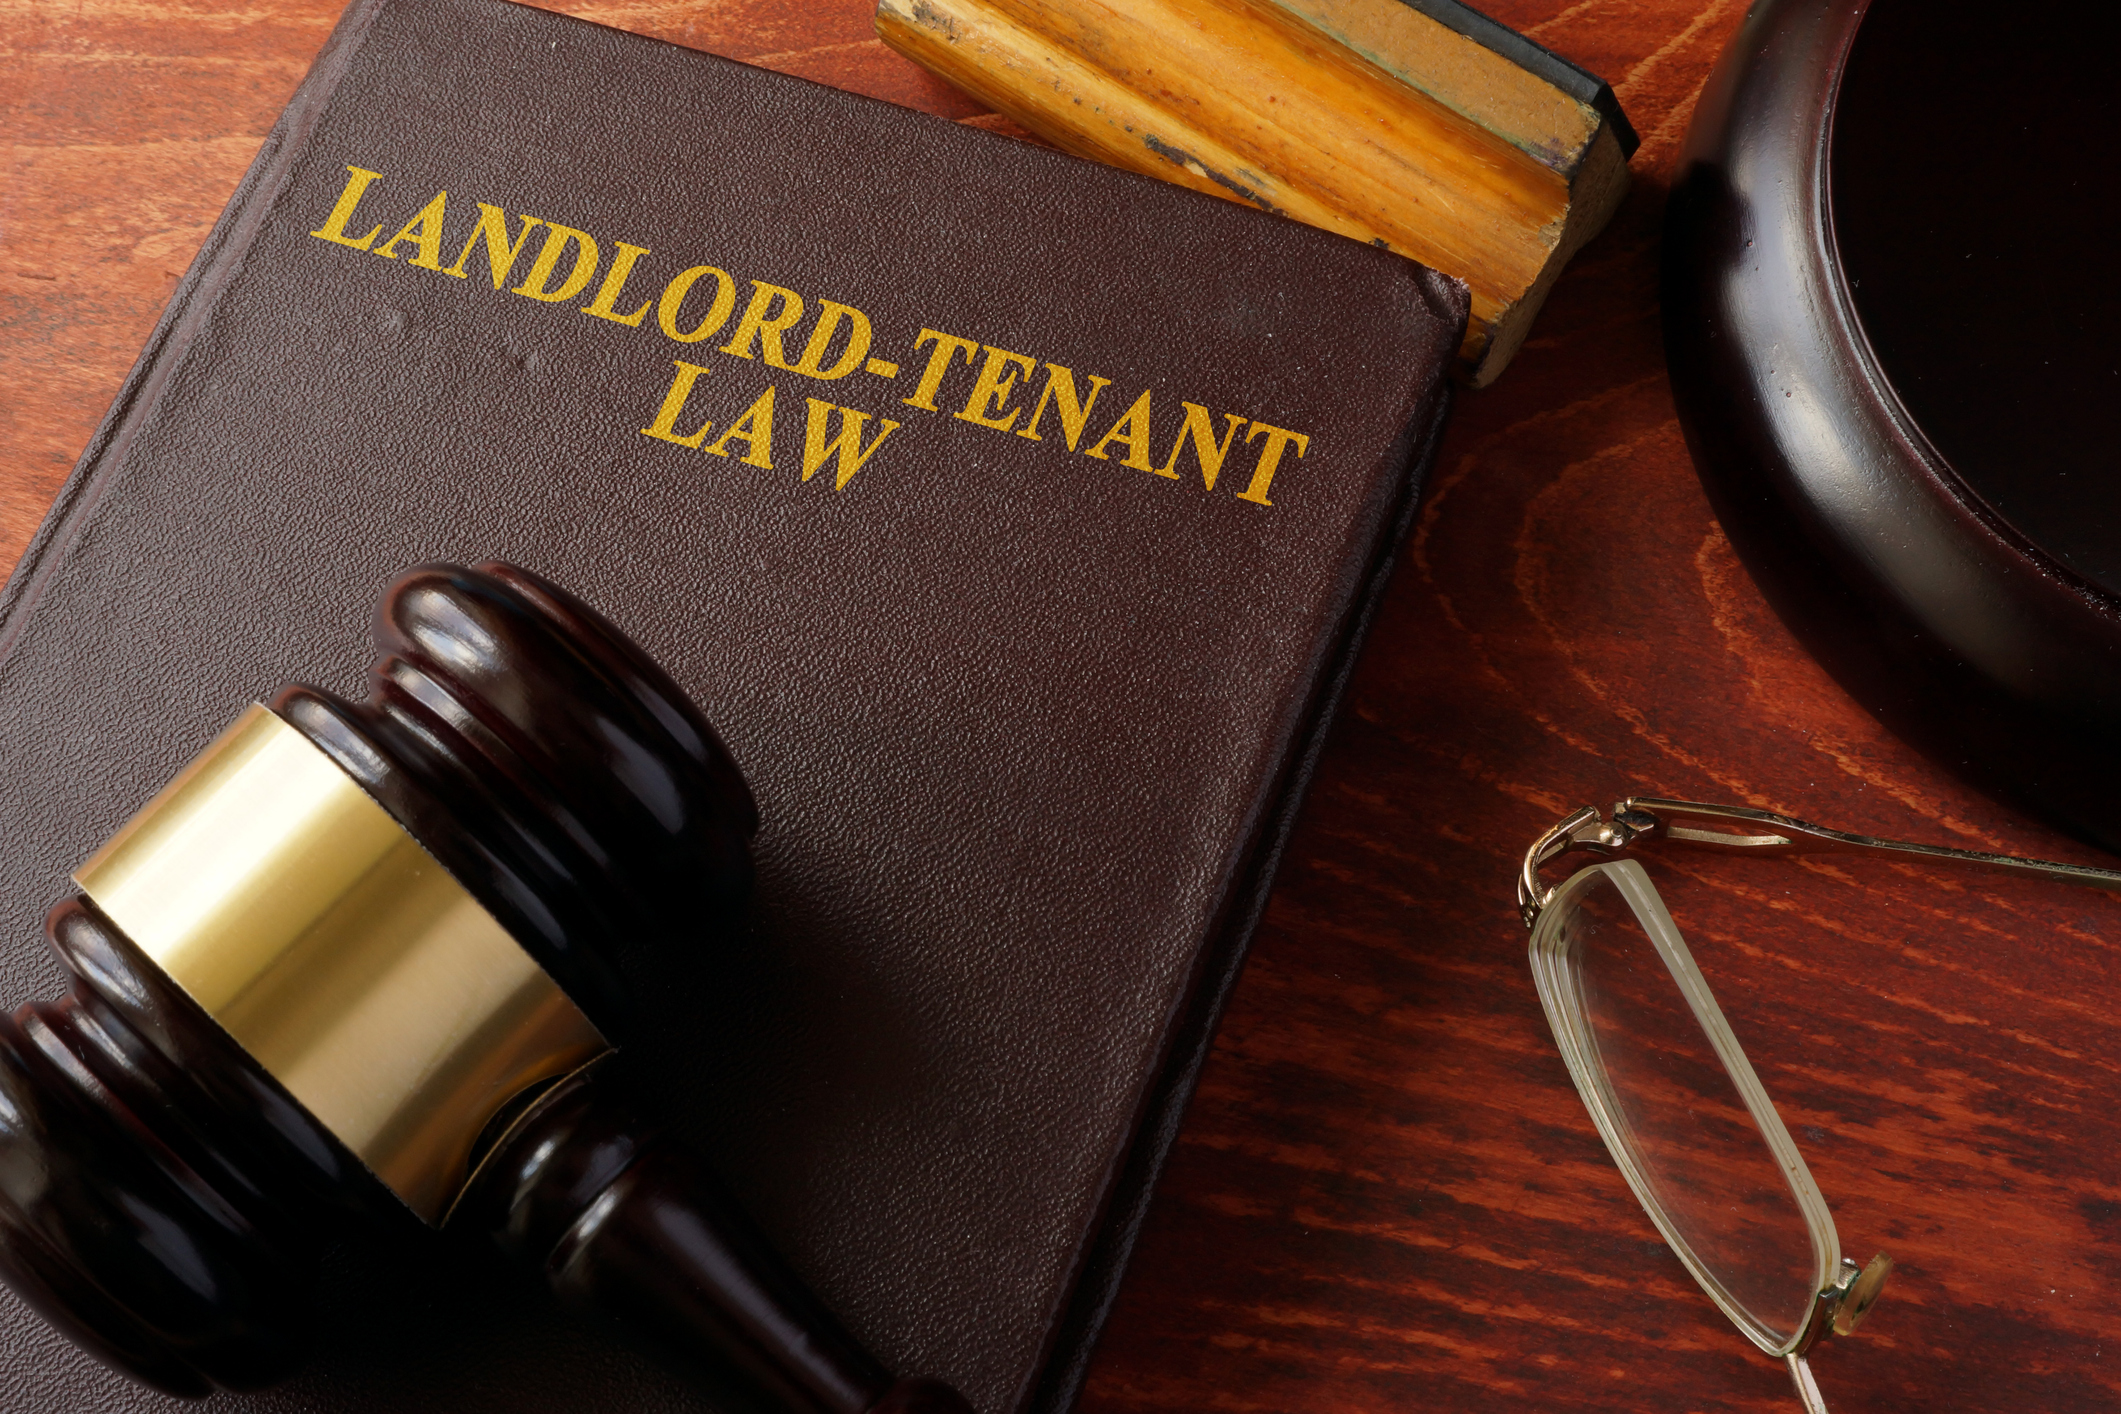 Buy an Investment Property in Phoenix Landlord Tenant Law